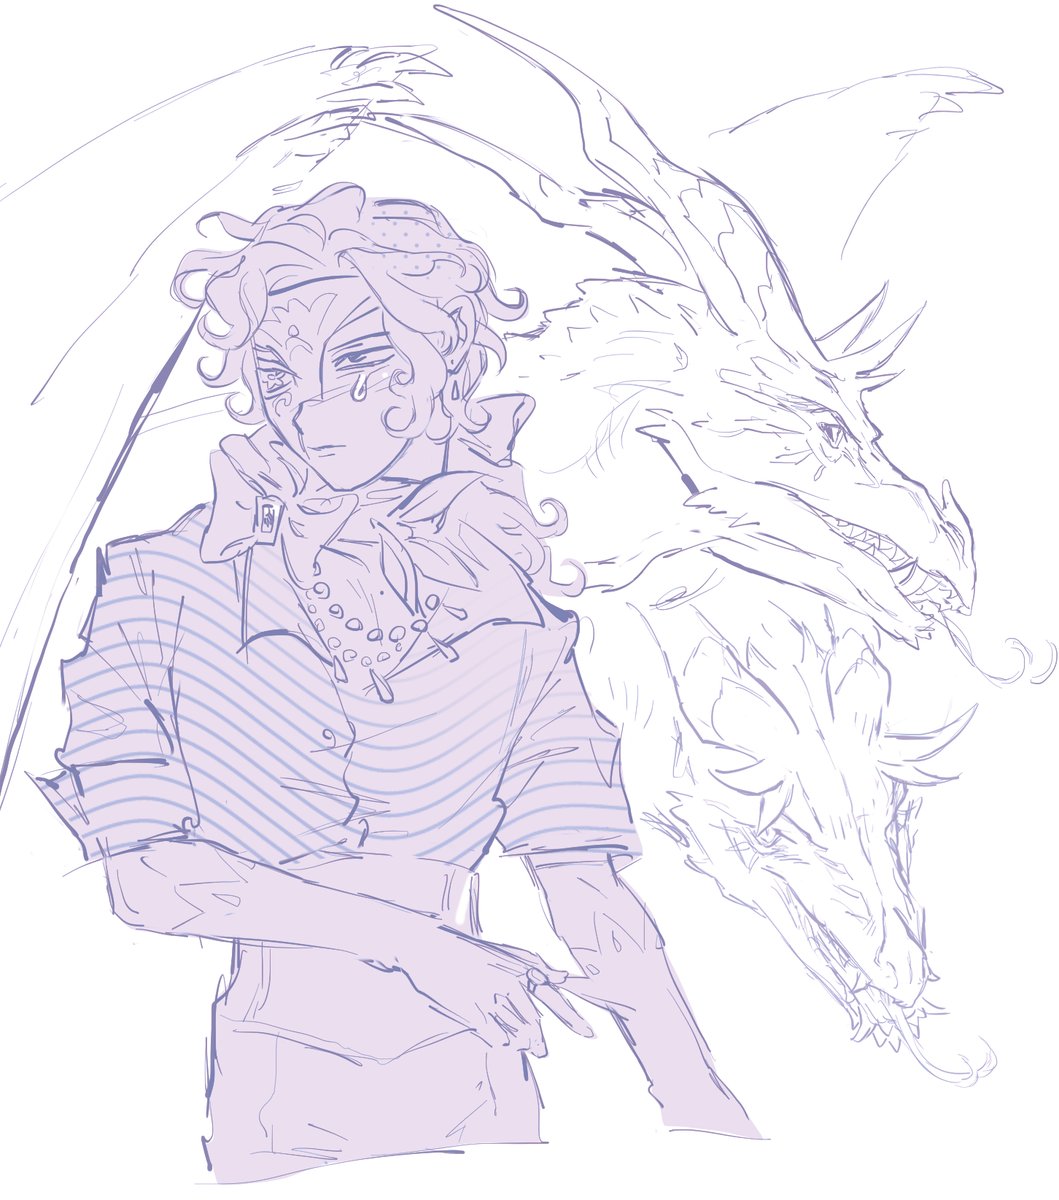 random narci and dragons because dragons are awesome and cool #hellyeah